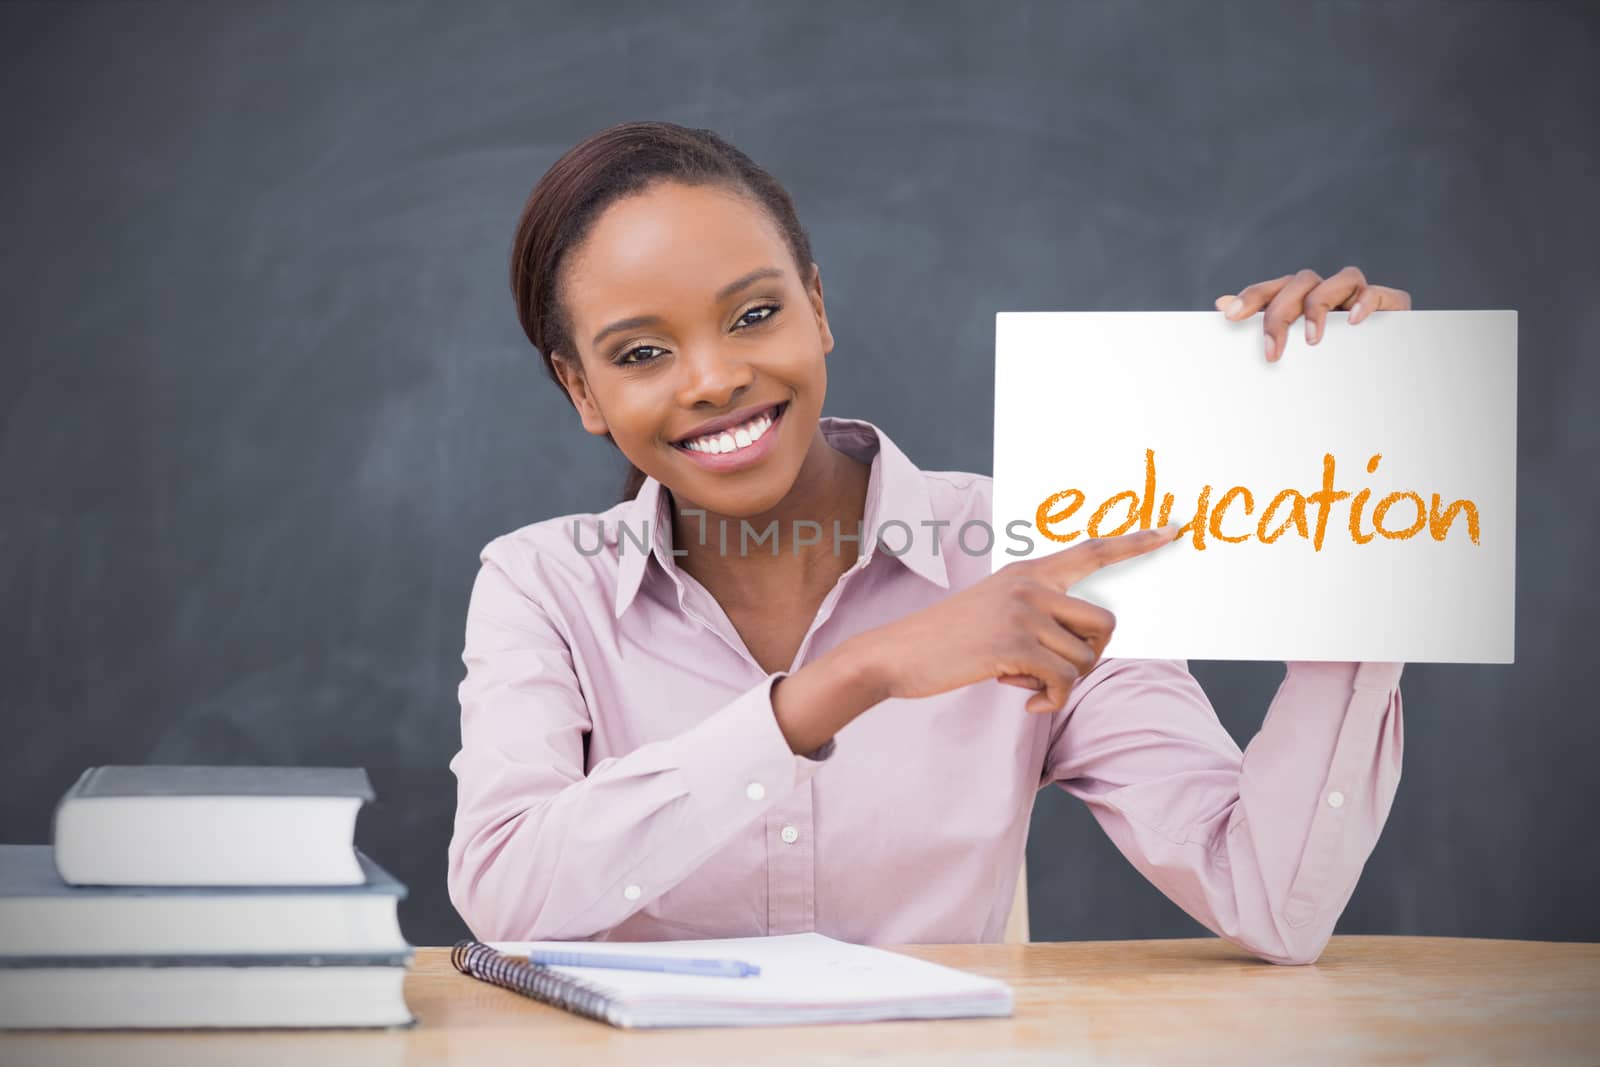 Happy teacher holding page showing education by Wavebreakmedia